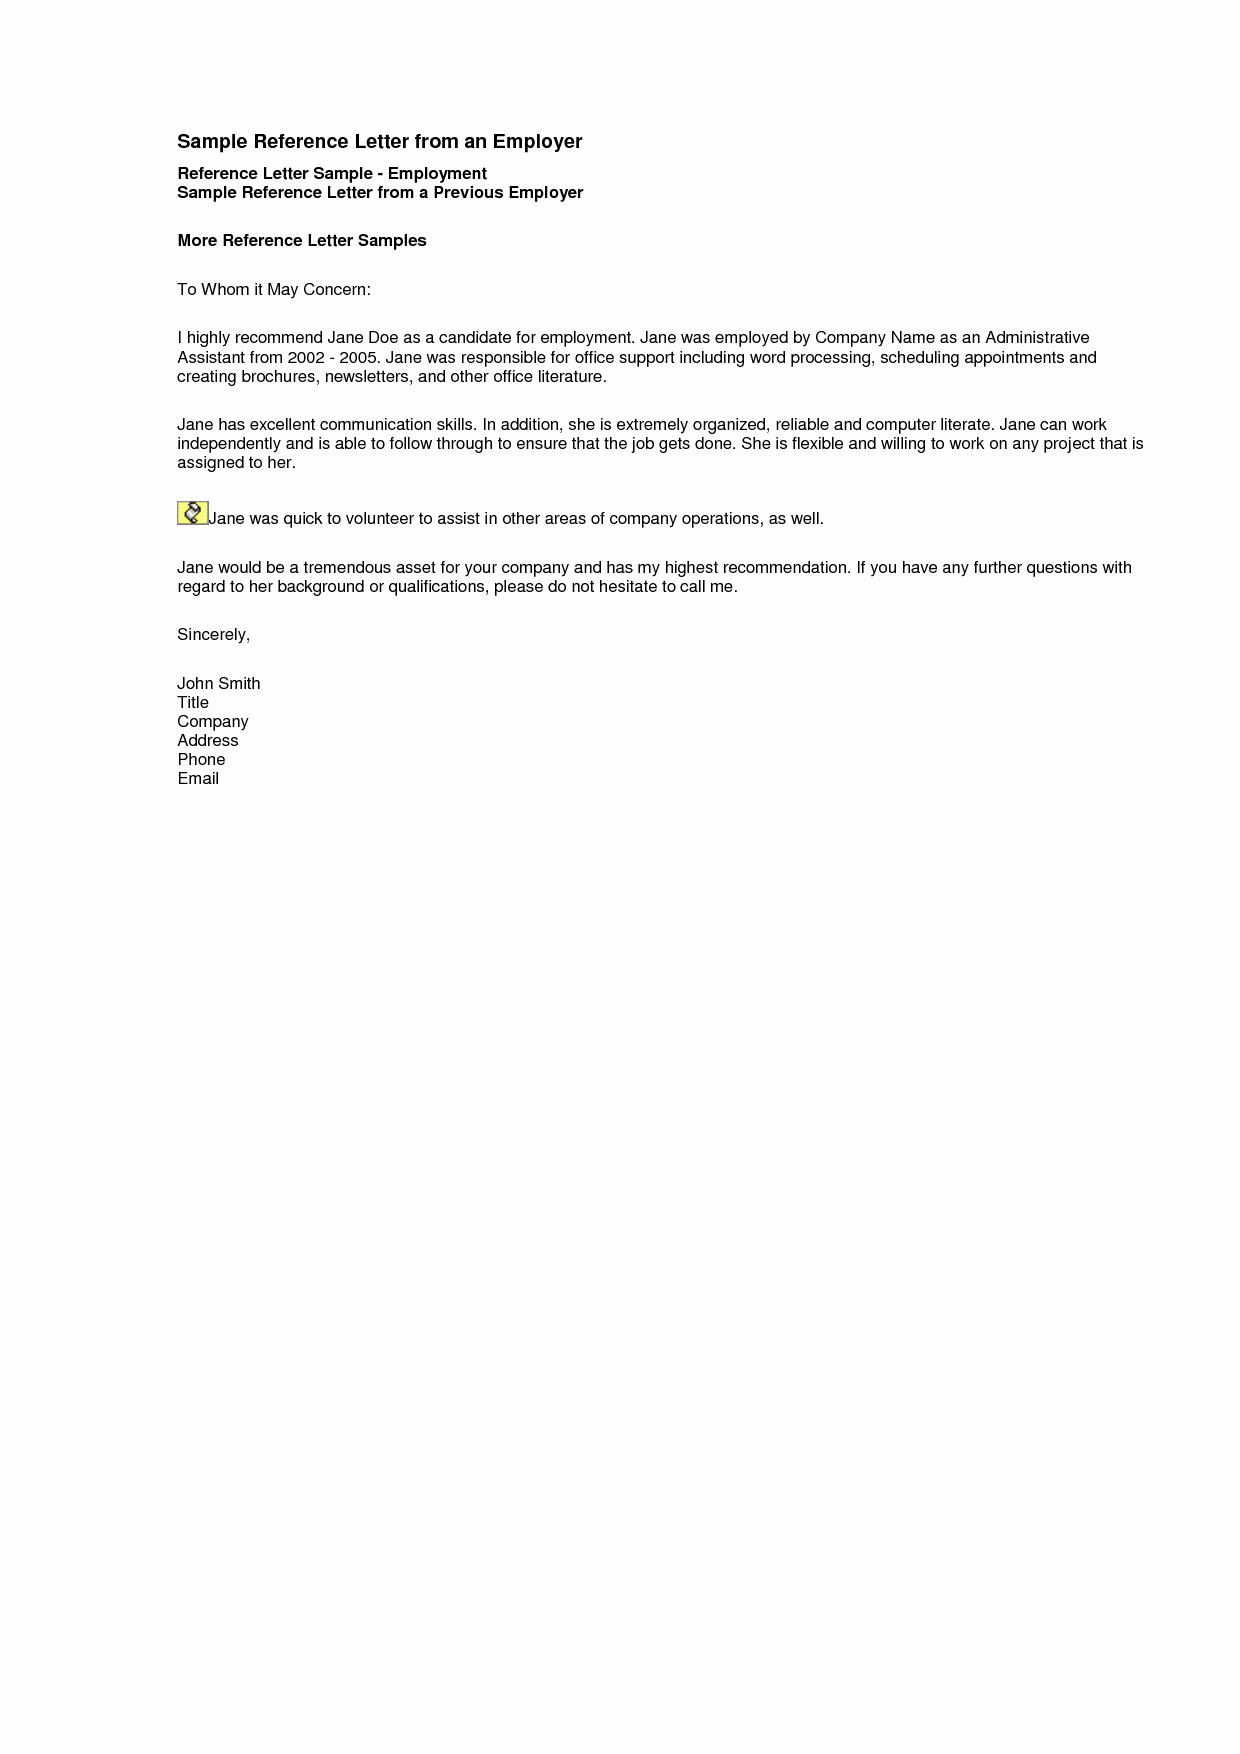 Sample Reference Letter for Employee Unique Sample Professional Reference Letter